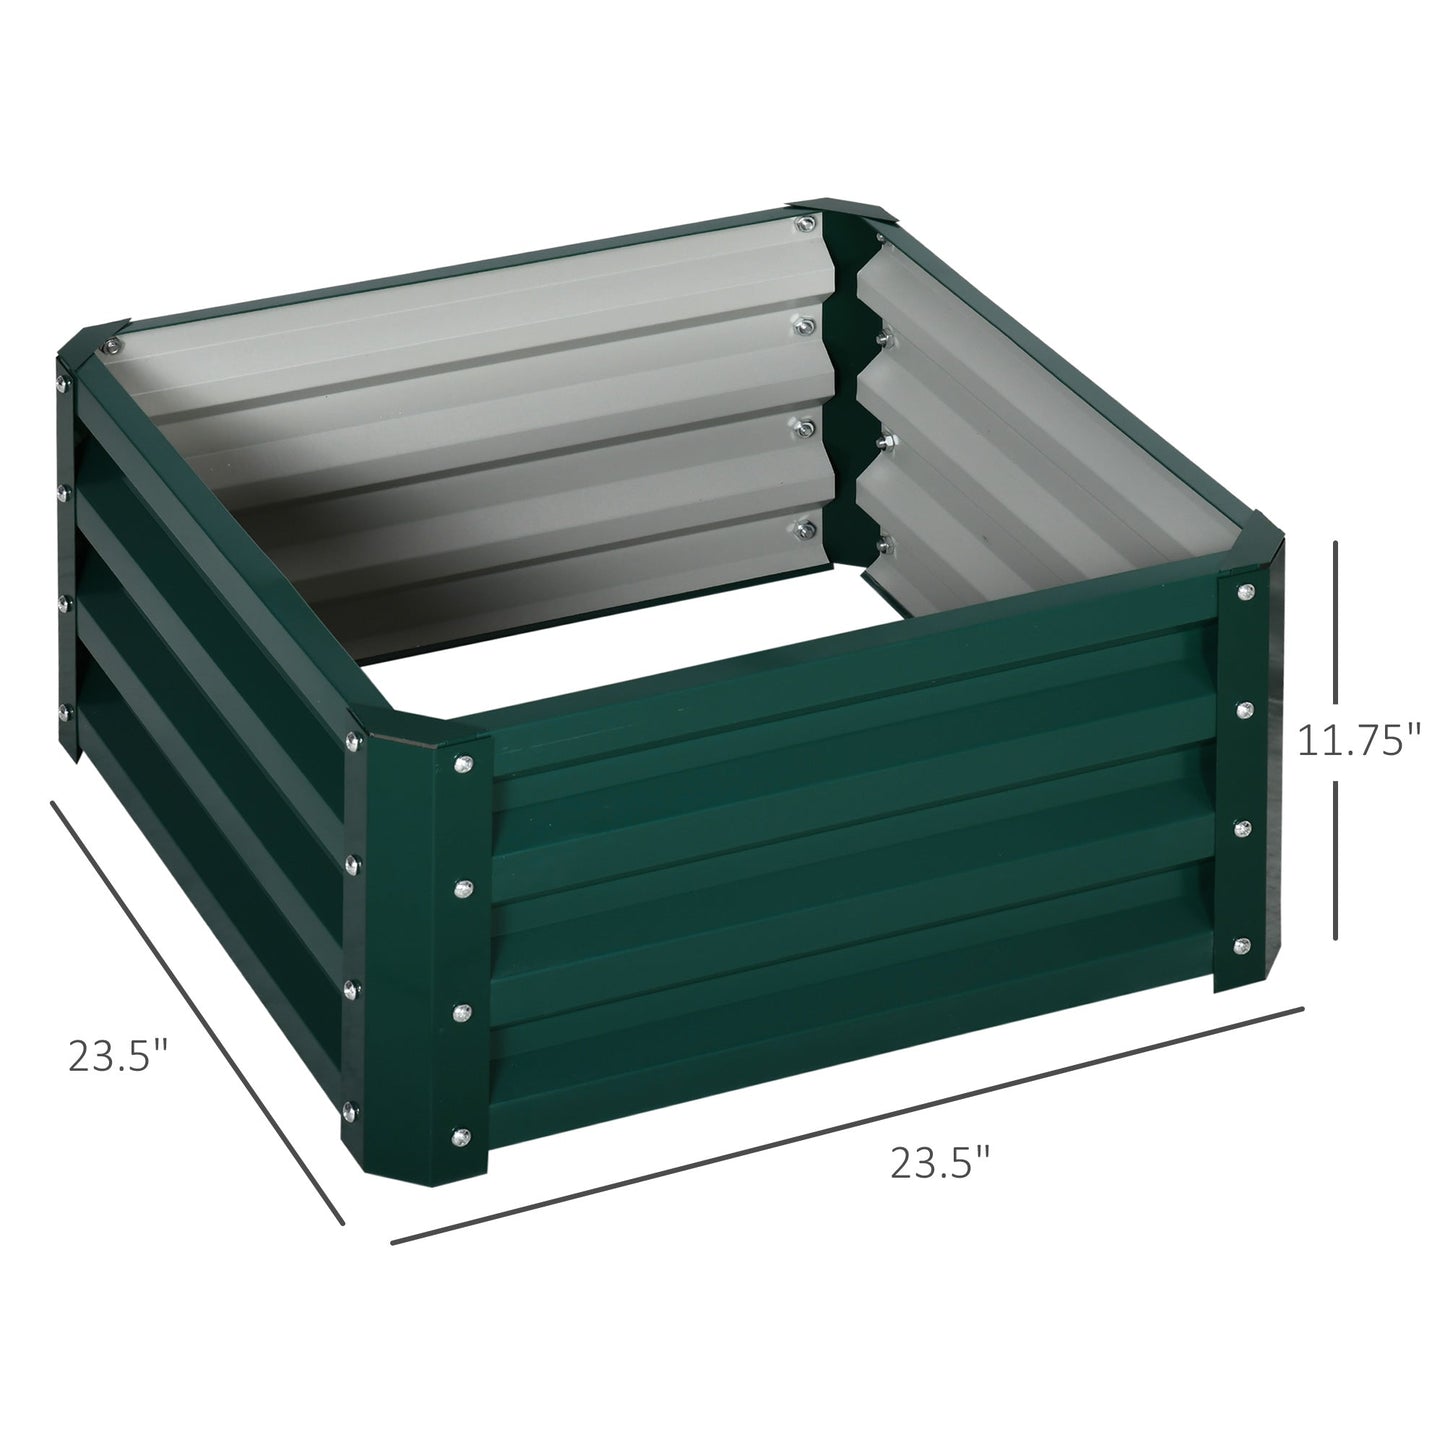 2' x 2' x 1' 2-Pieces Raised Garden Bed with Color Steel Frame for Vegetables, Flowers, Herbs, Green - Gallery Canada